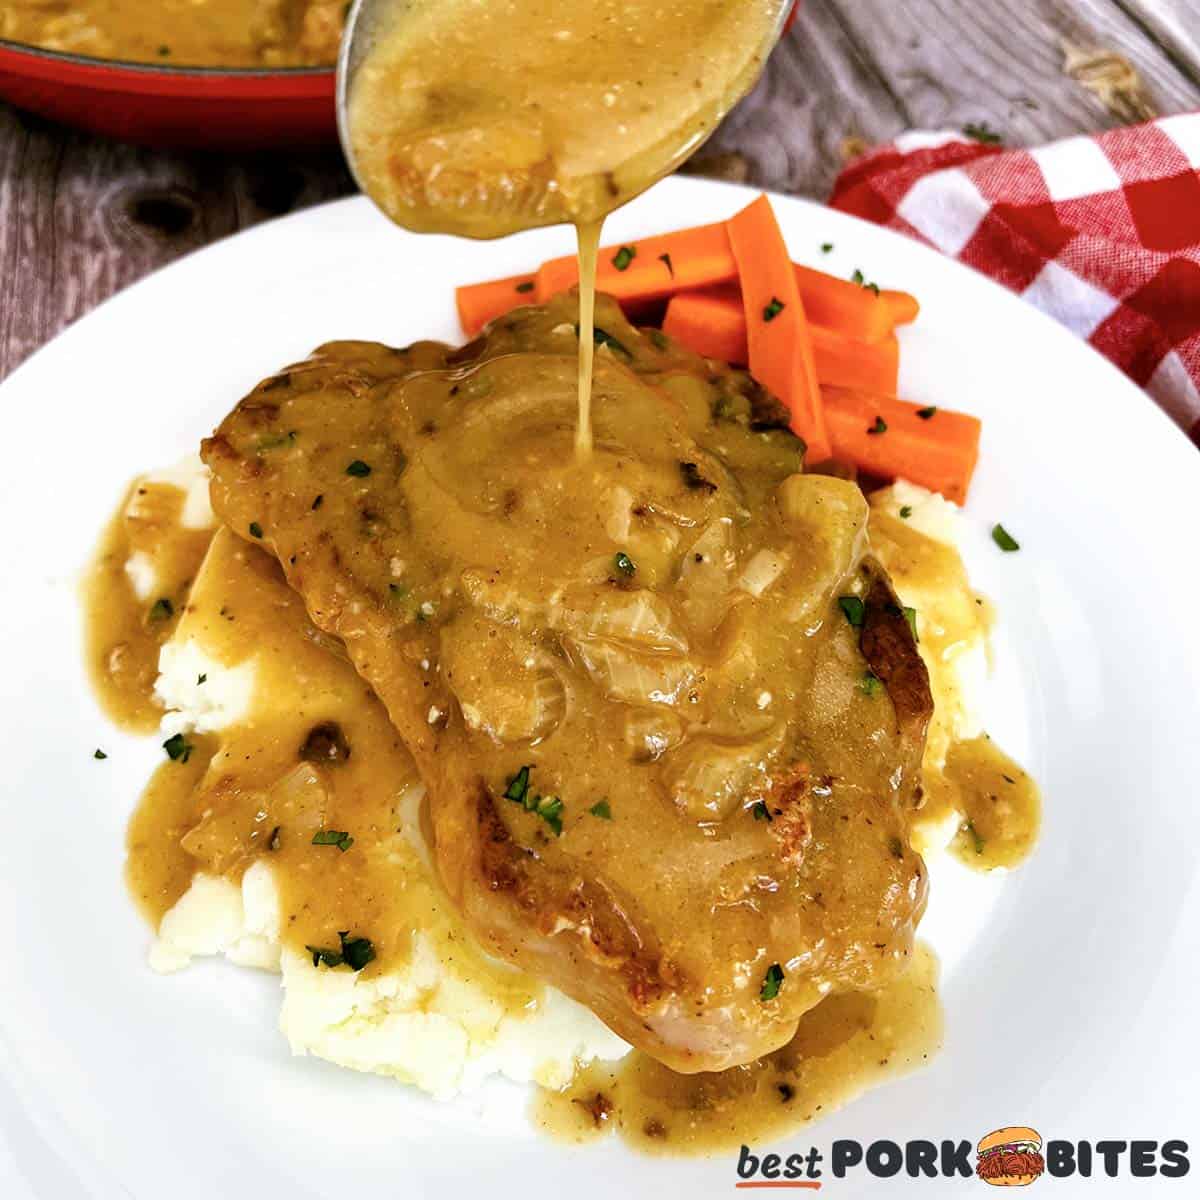 pouring gravy over smothered pork chops on a bed of mashed potatoes